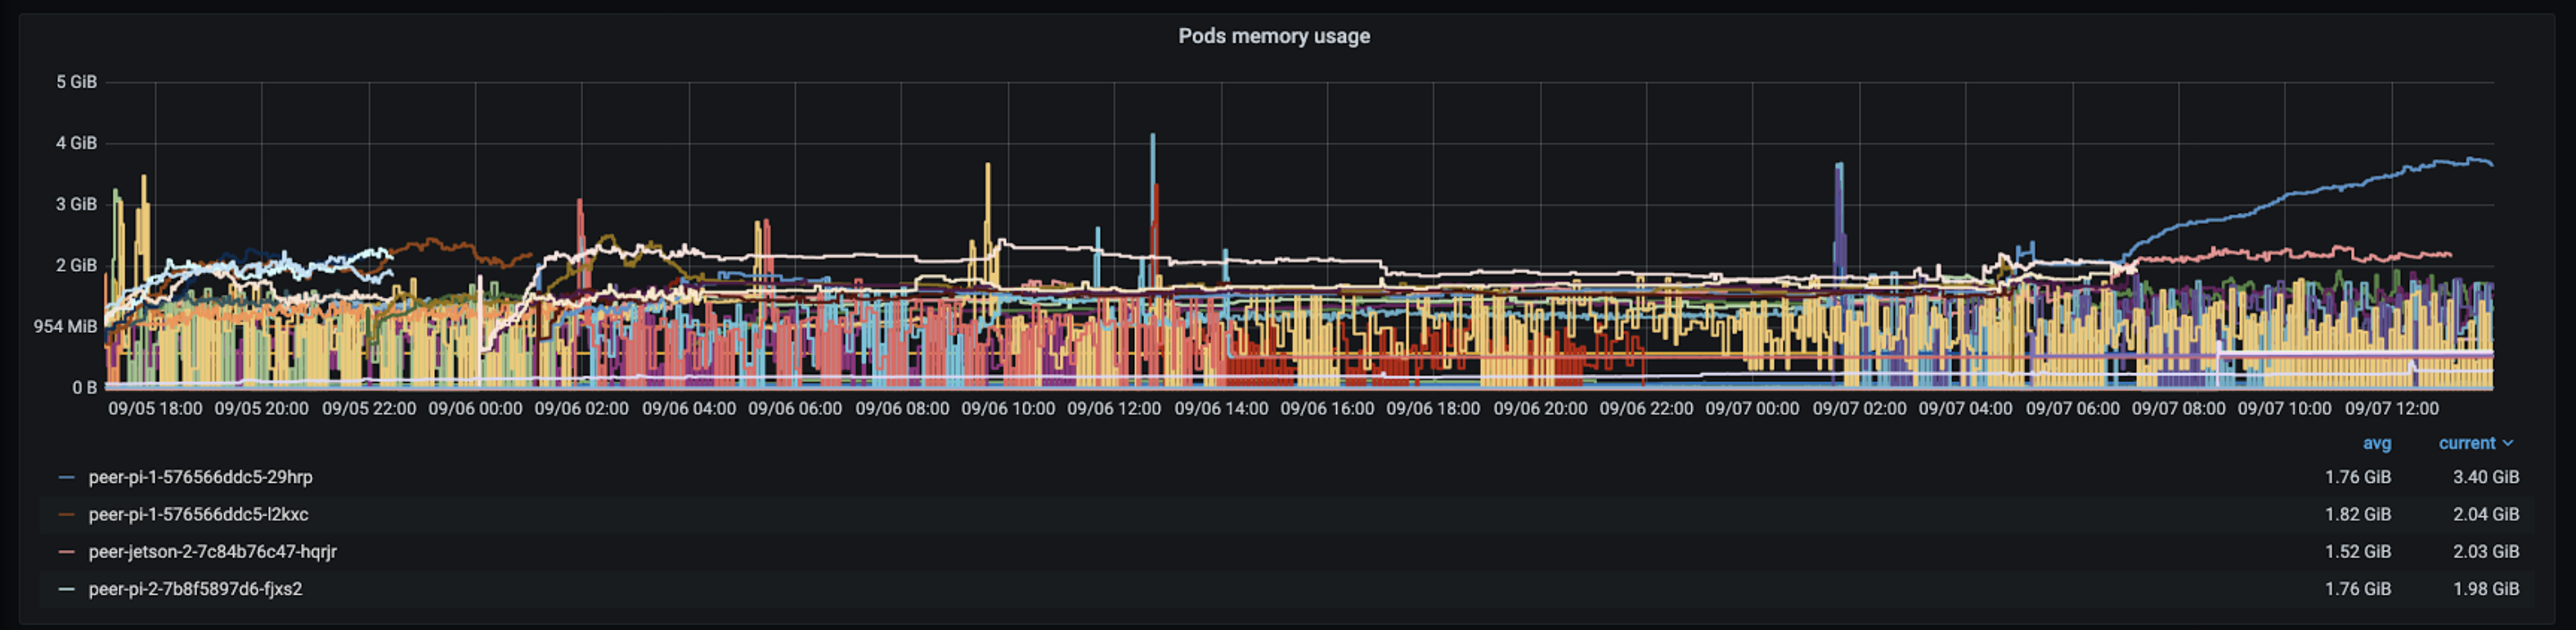 Memory Usage per Pod Total Transactions Published of Scale Out Benchmark